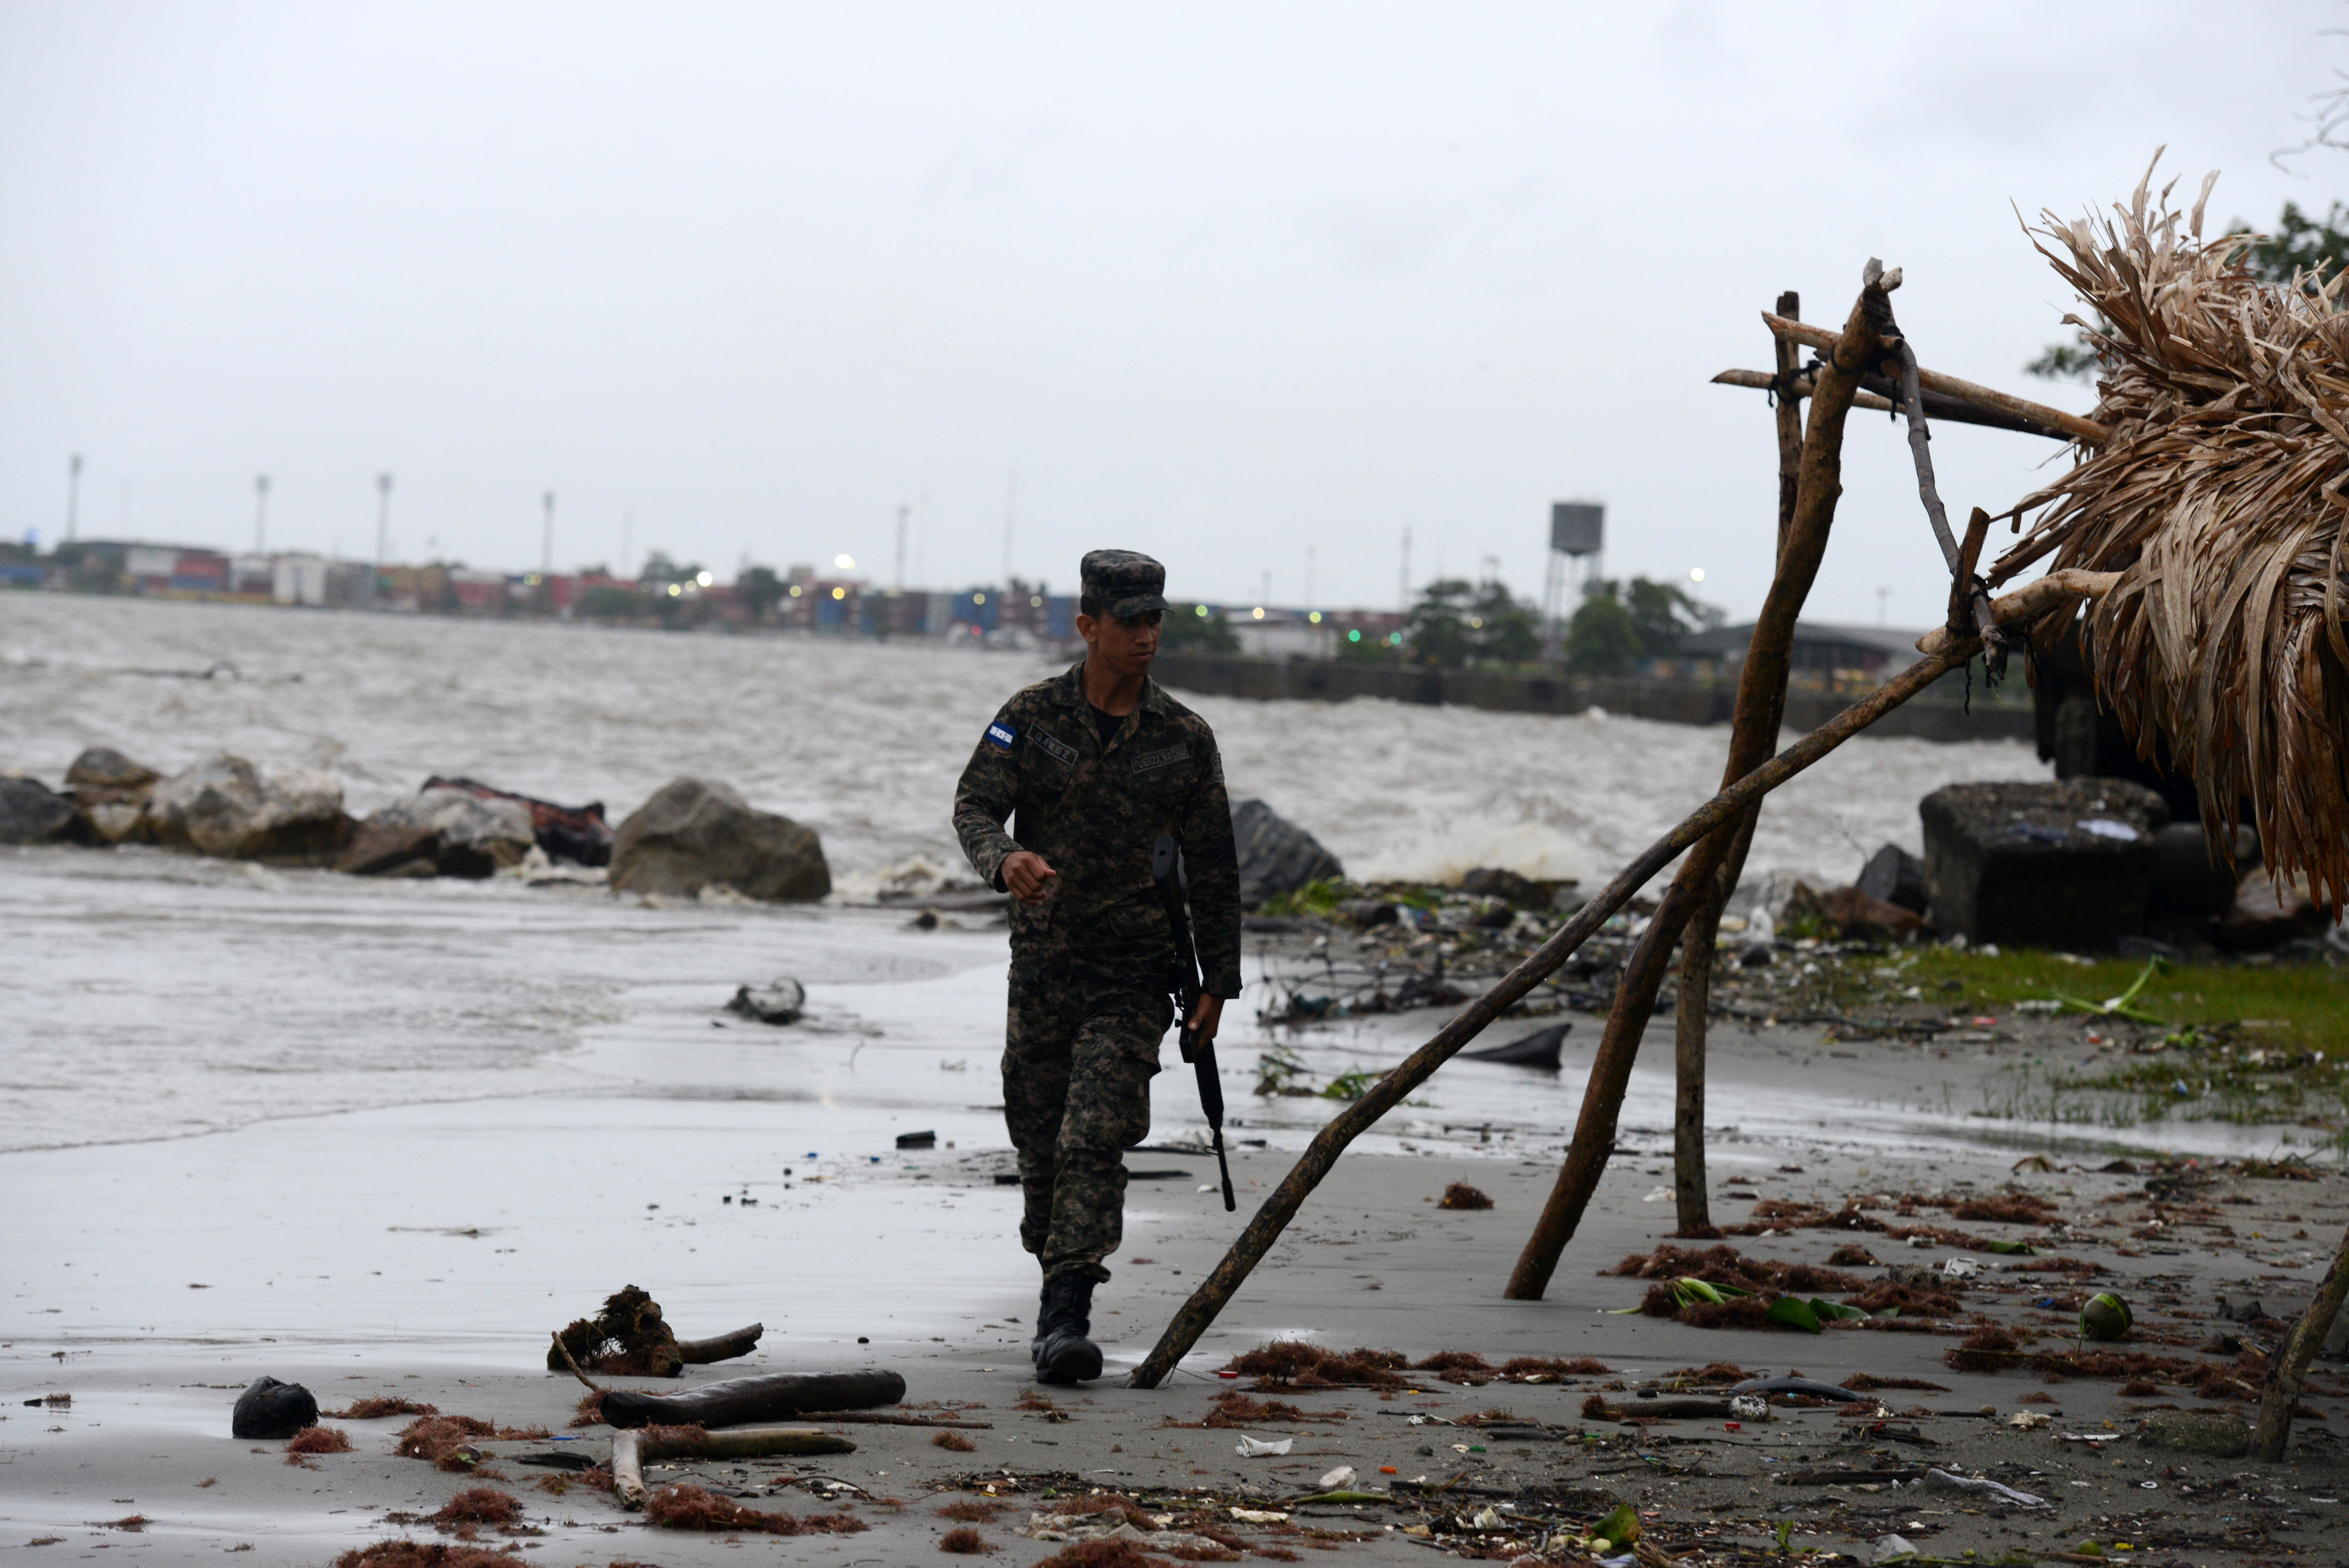 Soldiers patrol the shores of Puerto Cortes, in the Honduran Caribbean, on August 3, 2016, before the arrival of Hurricane Earl. The outlying sweep of a tropical hurricane gliding across the Caribbean started lashing northern Central American countries Wednesday amid warnings from authorities of the risk of impending floods and mud slides. / AFP PHOTO / ORLANDO SIERRA